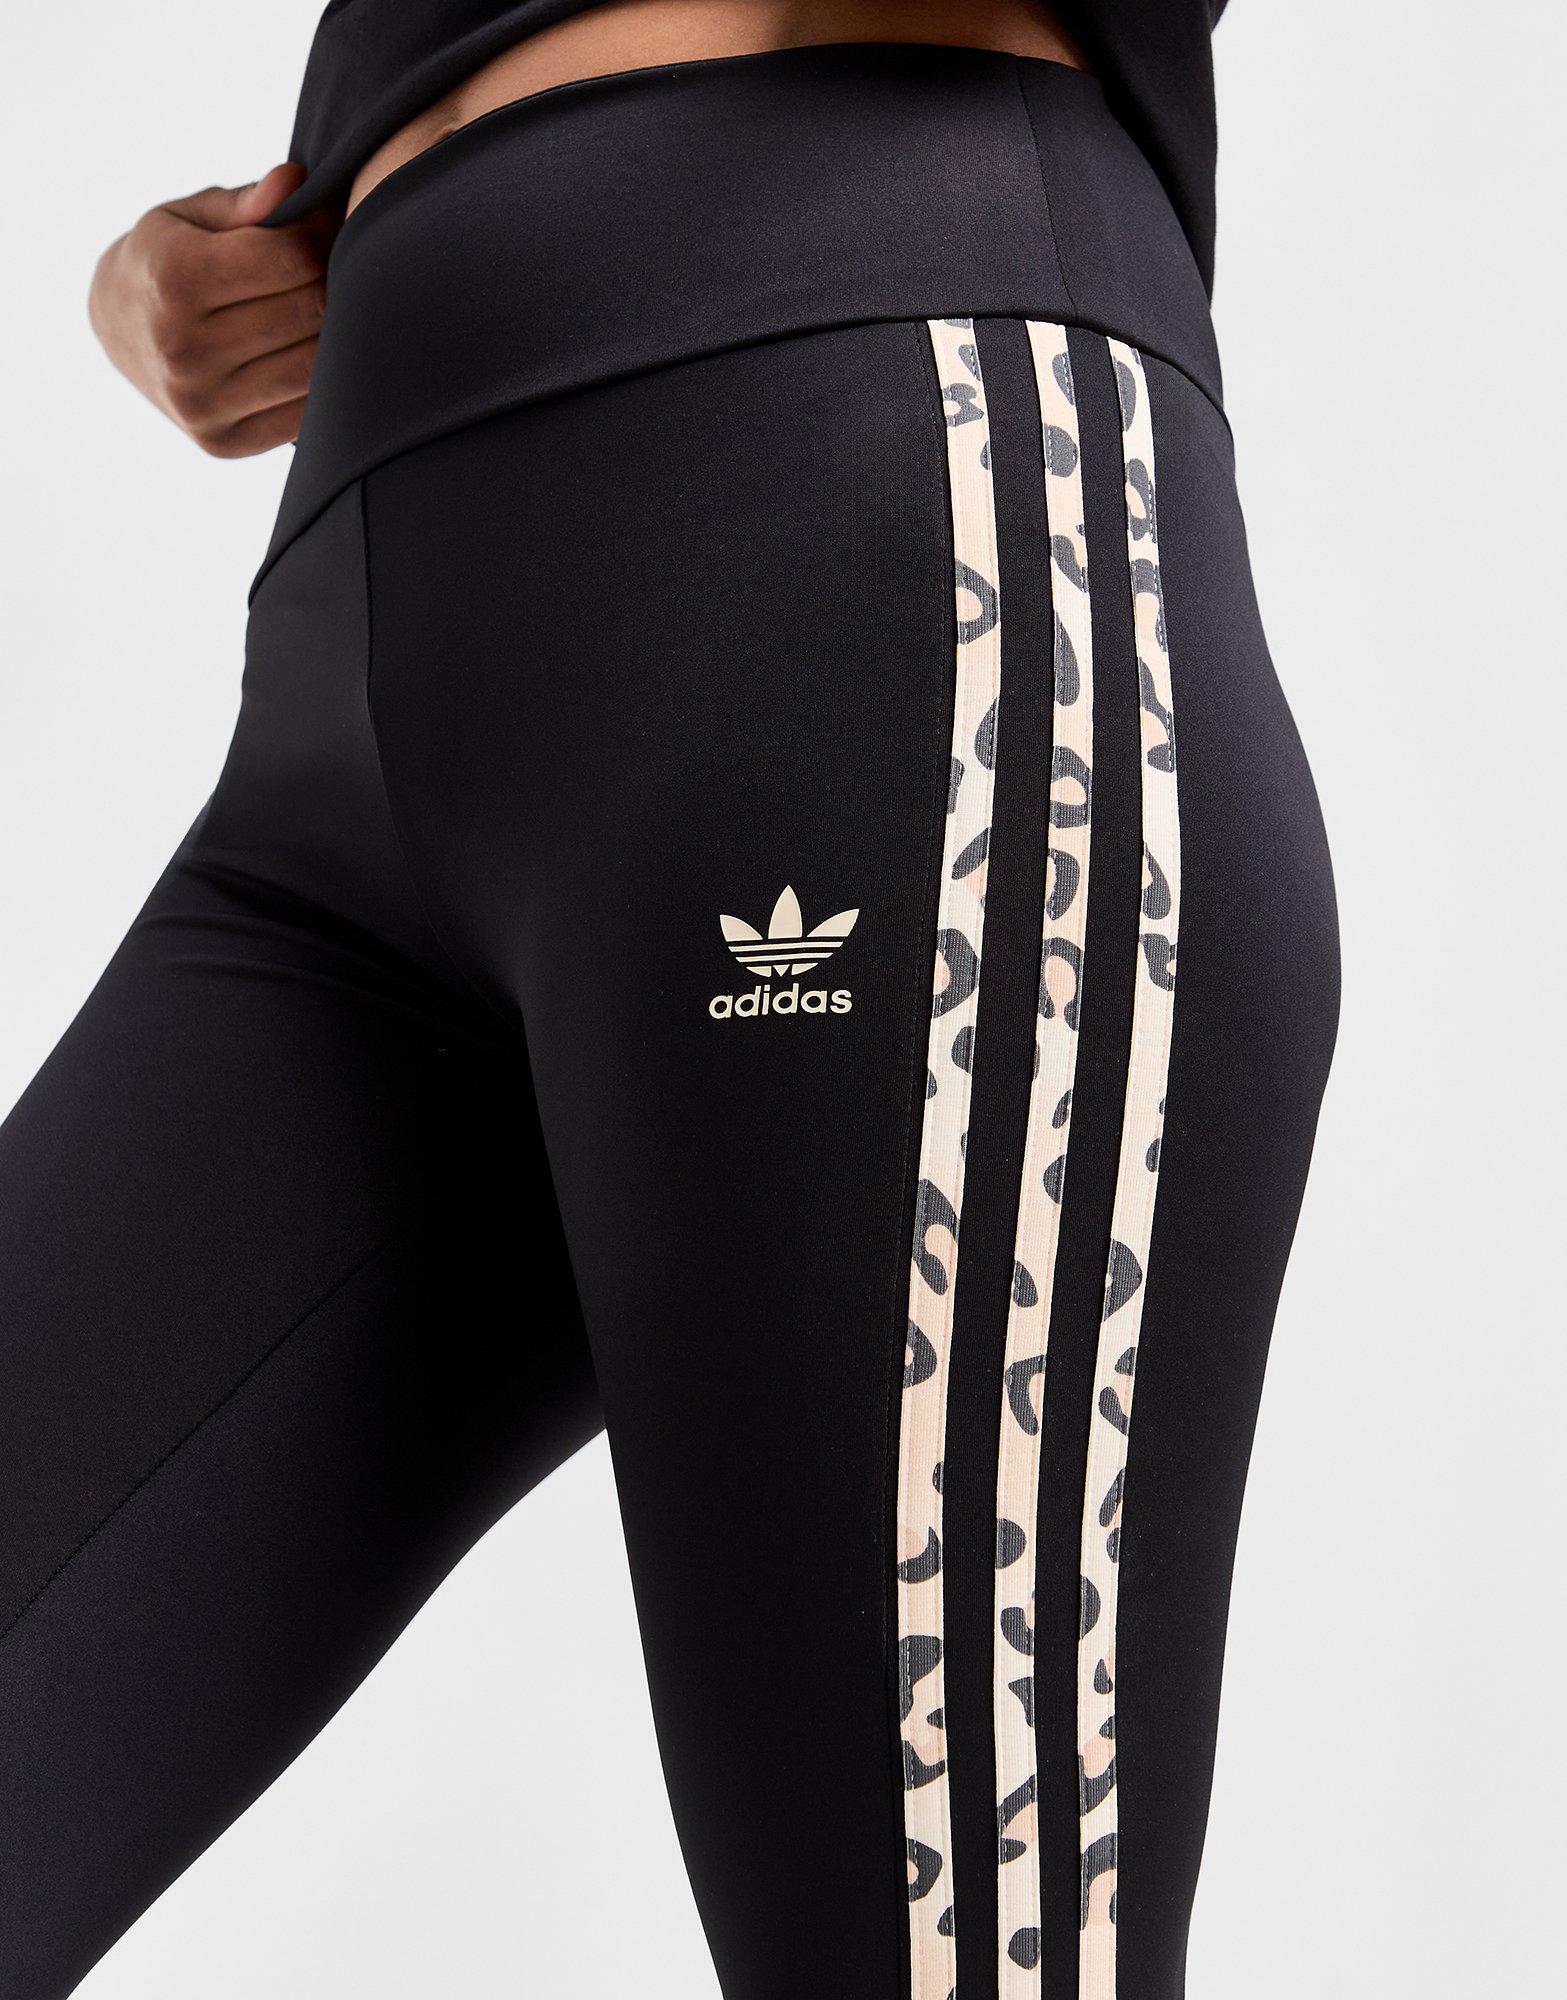 Adidas Originals 'Leopard Luxe' Leggings In Black With Leopard Three  Stripes for Women